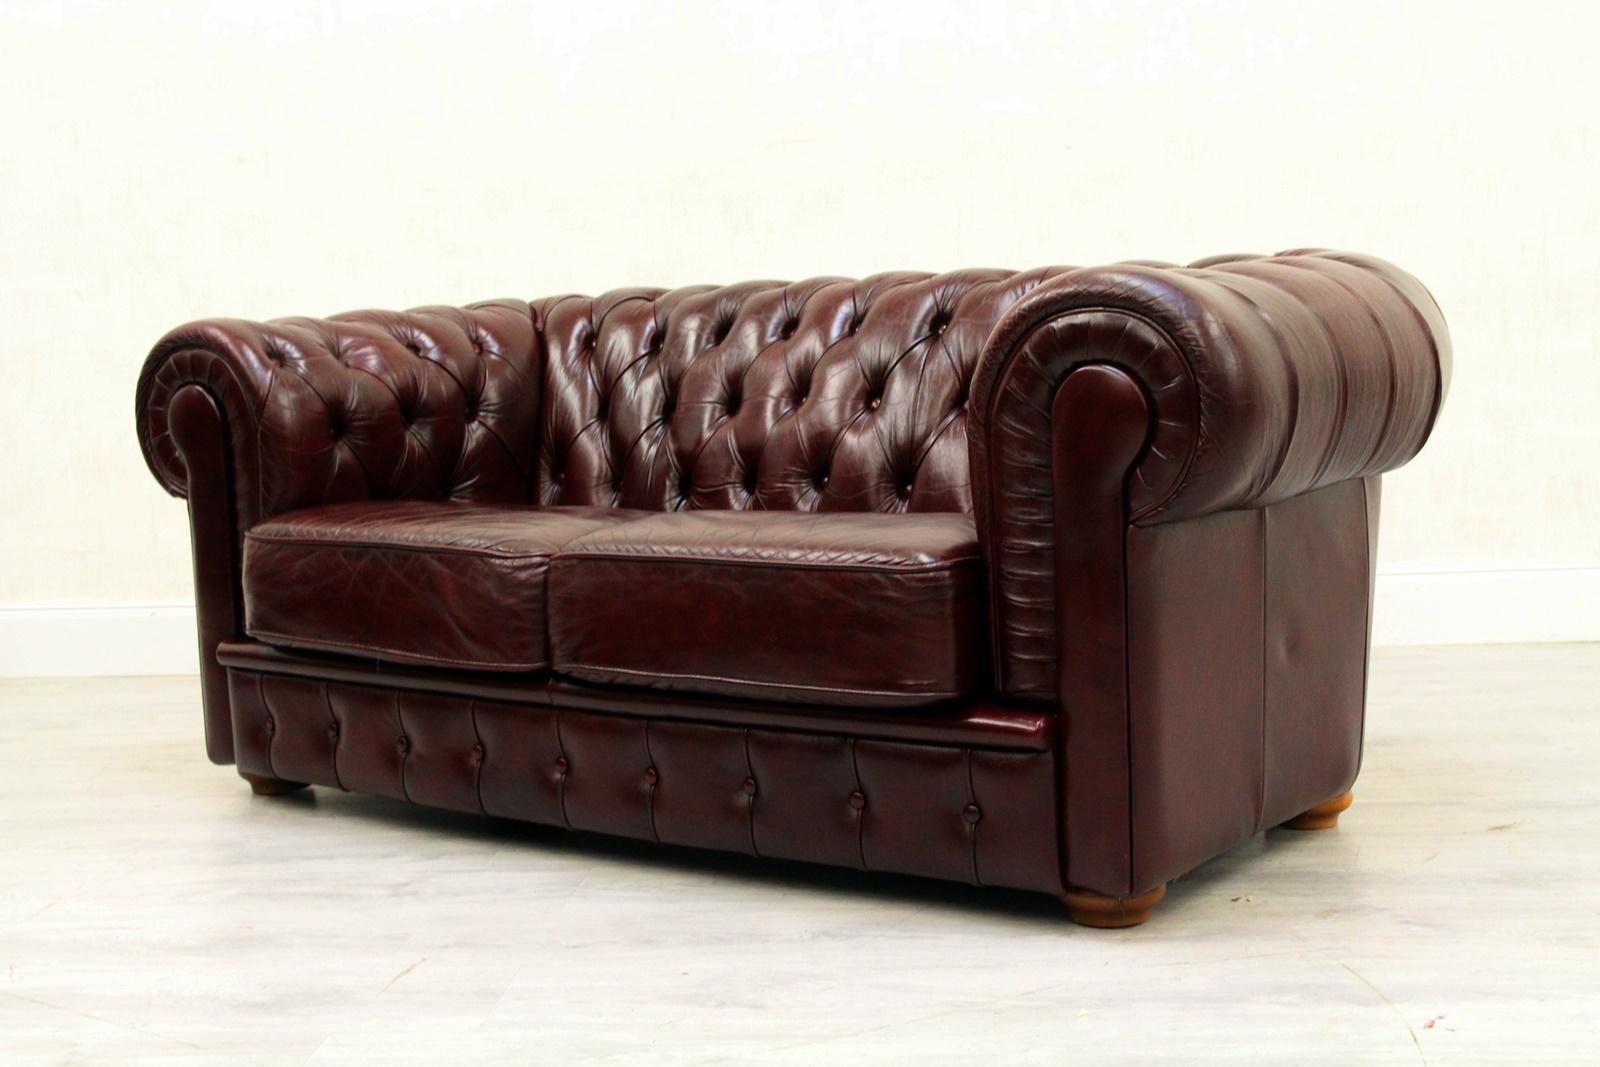 Chesterfield English Sofa Leather Antique Vintage Couch Chippendale For Sale 1